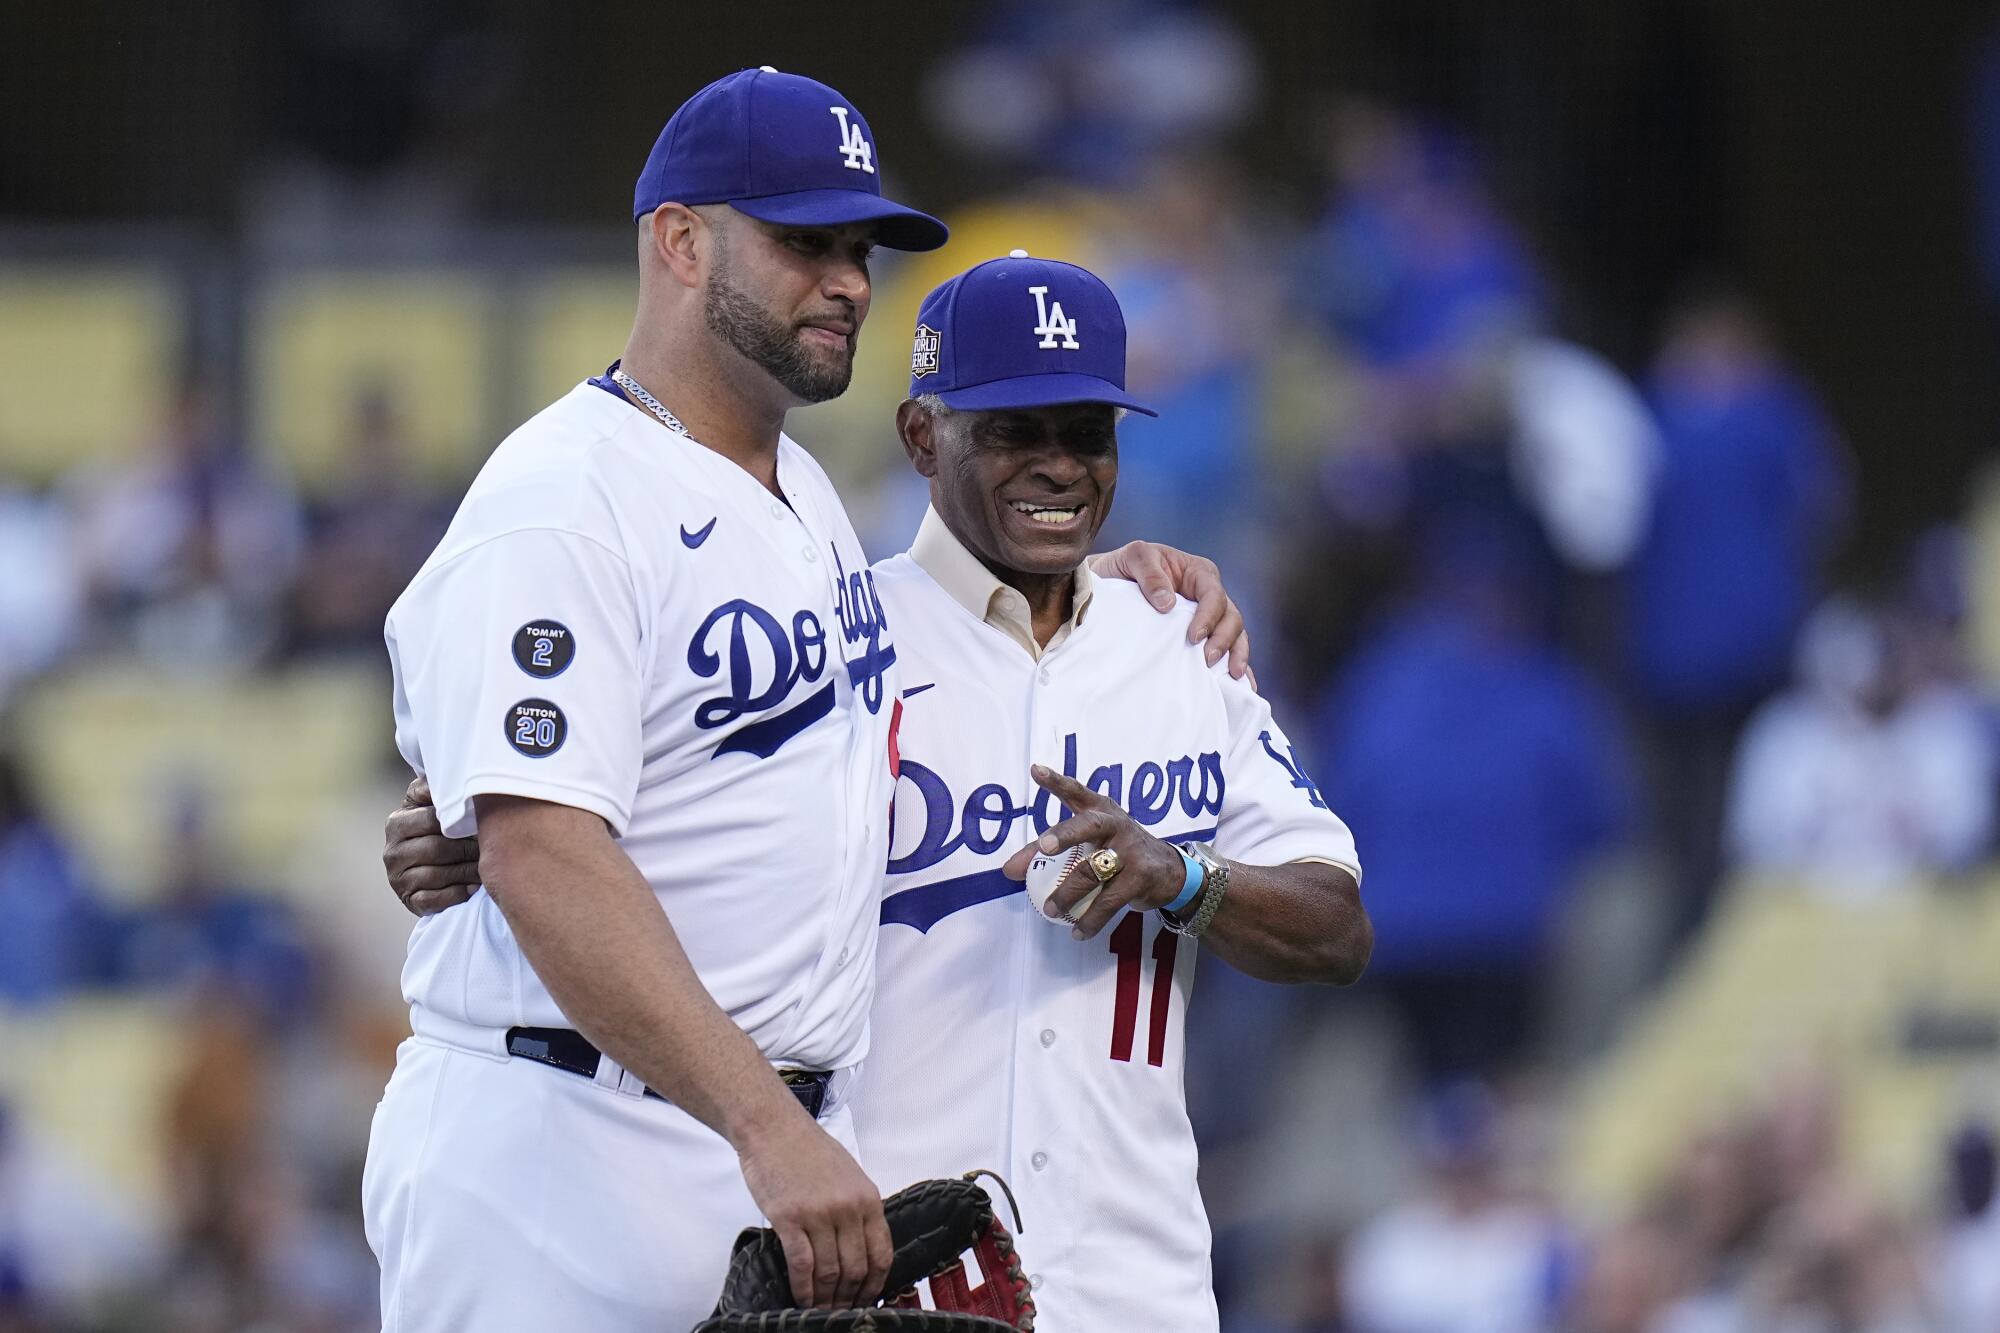 Manny Mota inducted into Legends of Dodger Baseball - CBS Los Angeles